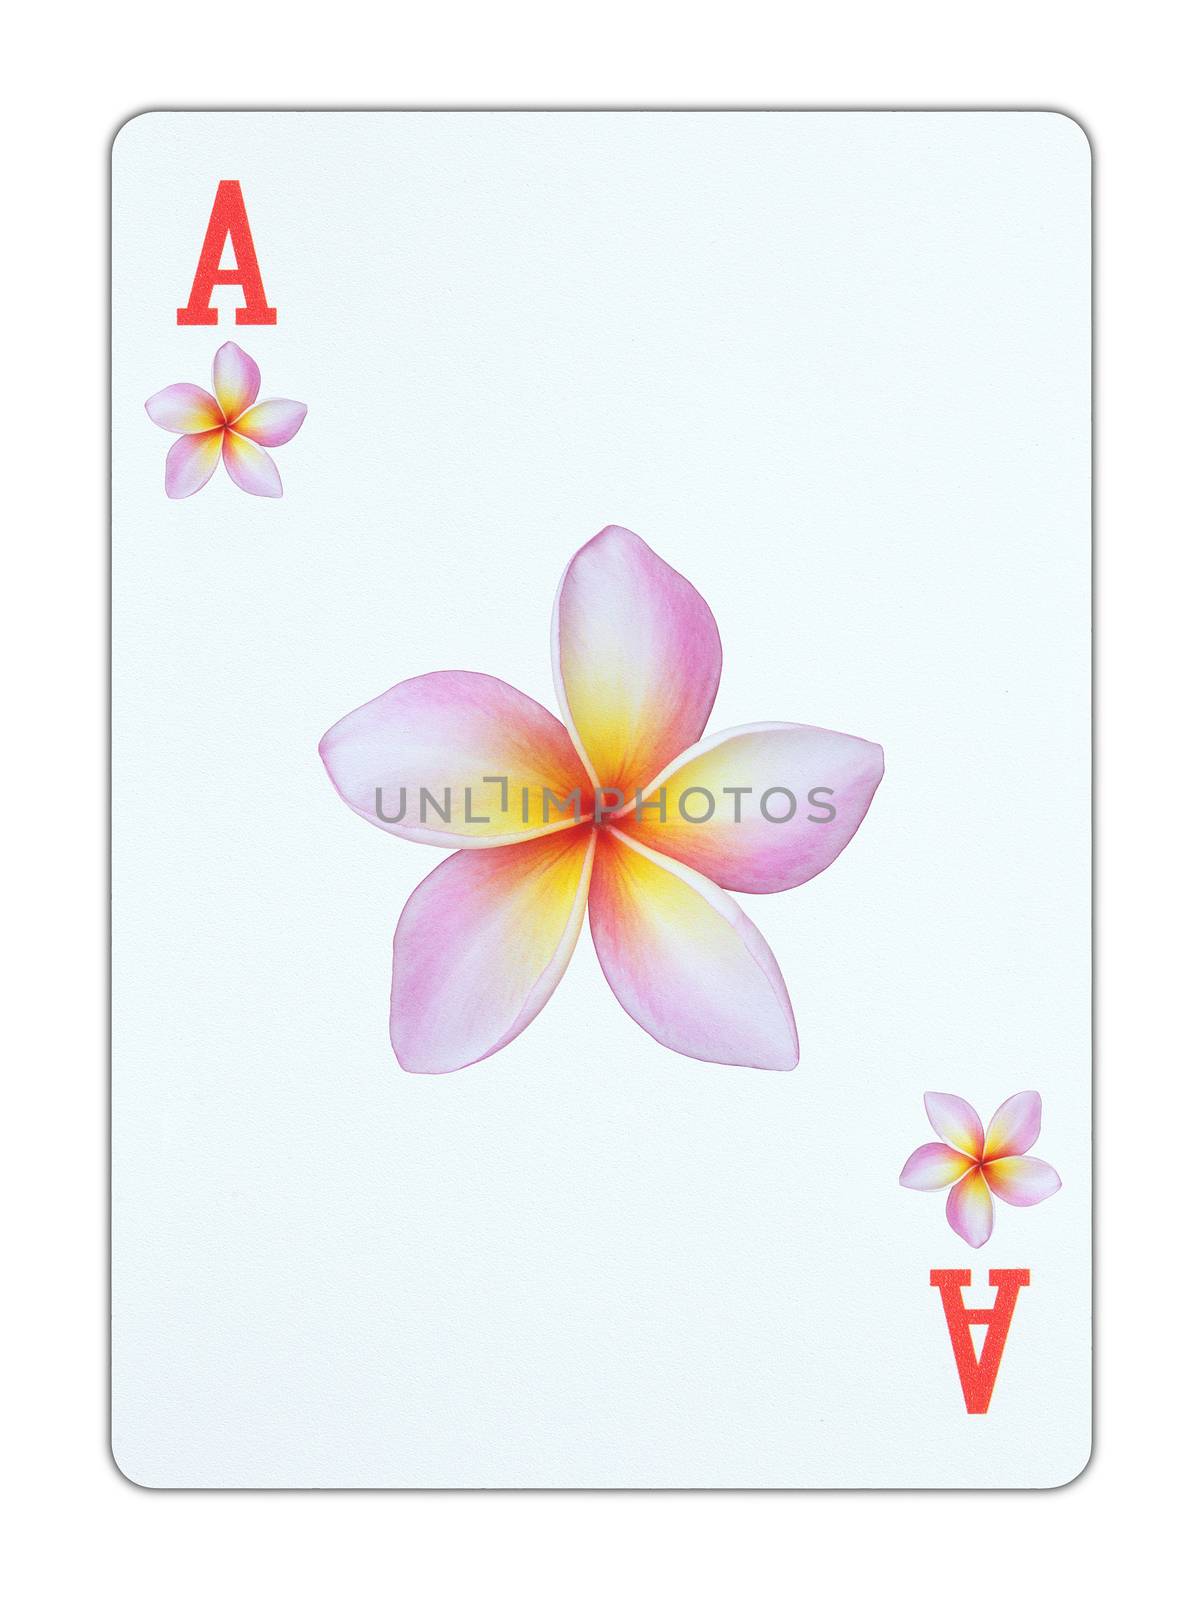 Playing card - Ace of flowers